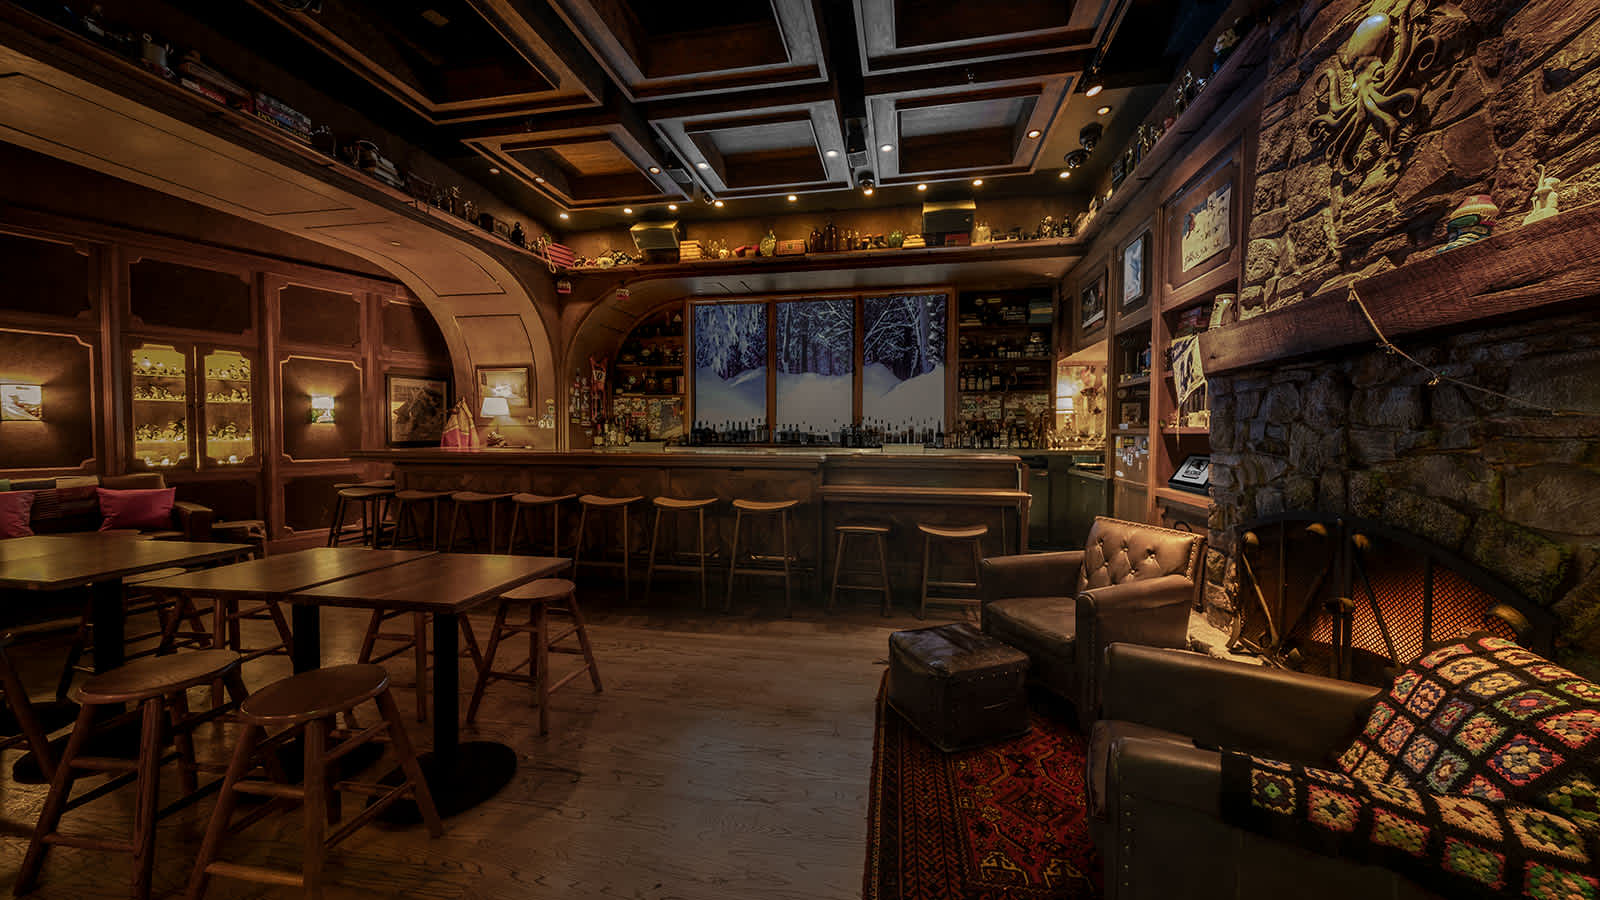 Las Vegas Bars and Lounges